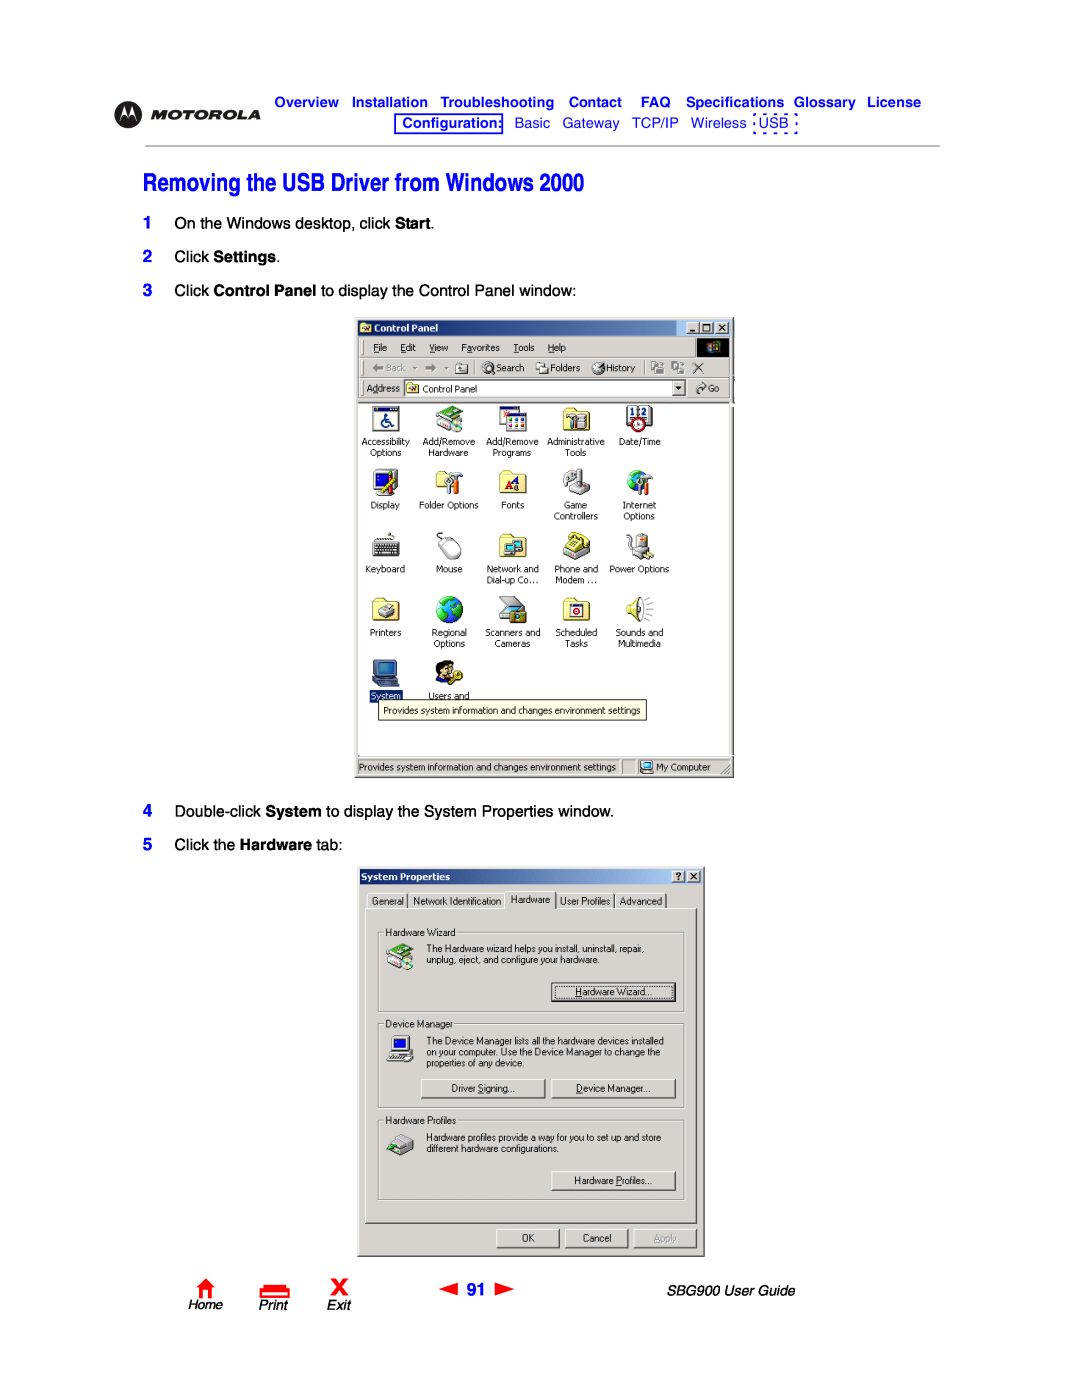 Motorola manual Removing the USB Driver from Windows, Click Settings, Home Print Exit, SBG900 User Guide 